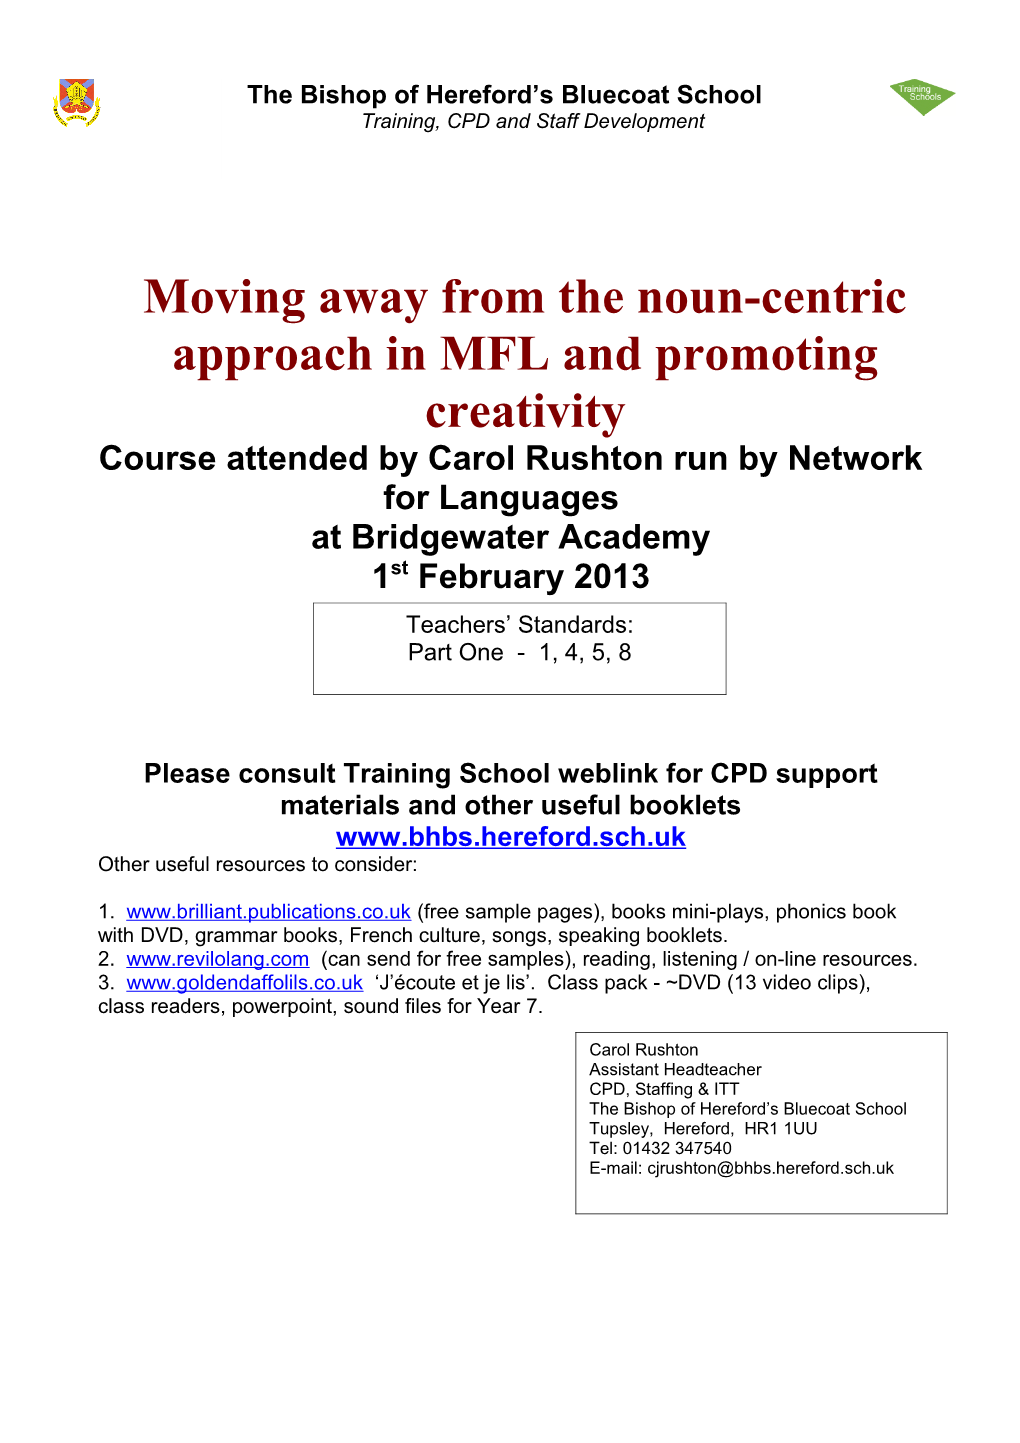 Moving Away from the Noun-Centric Approach in MFL and Promoting Creativity